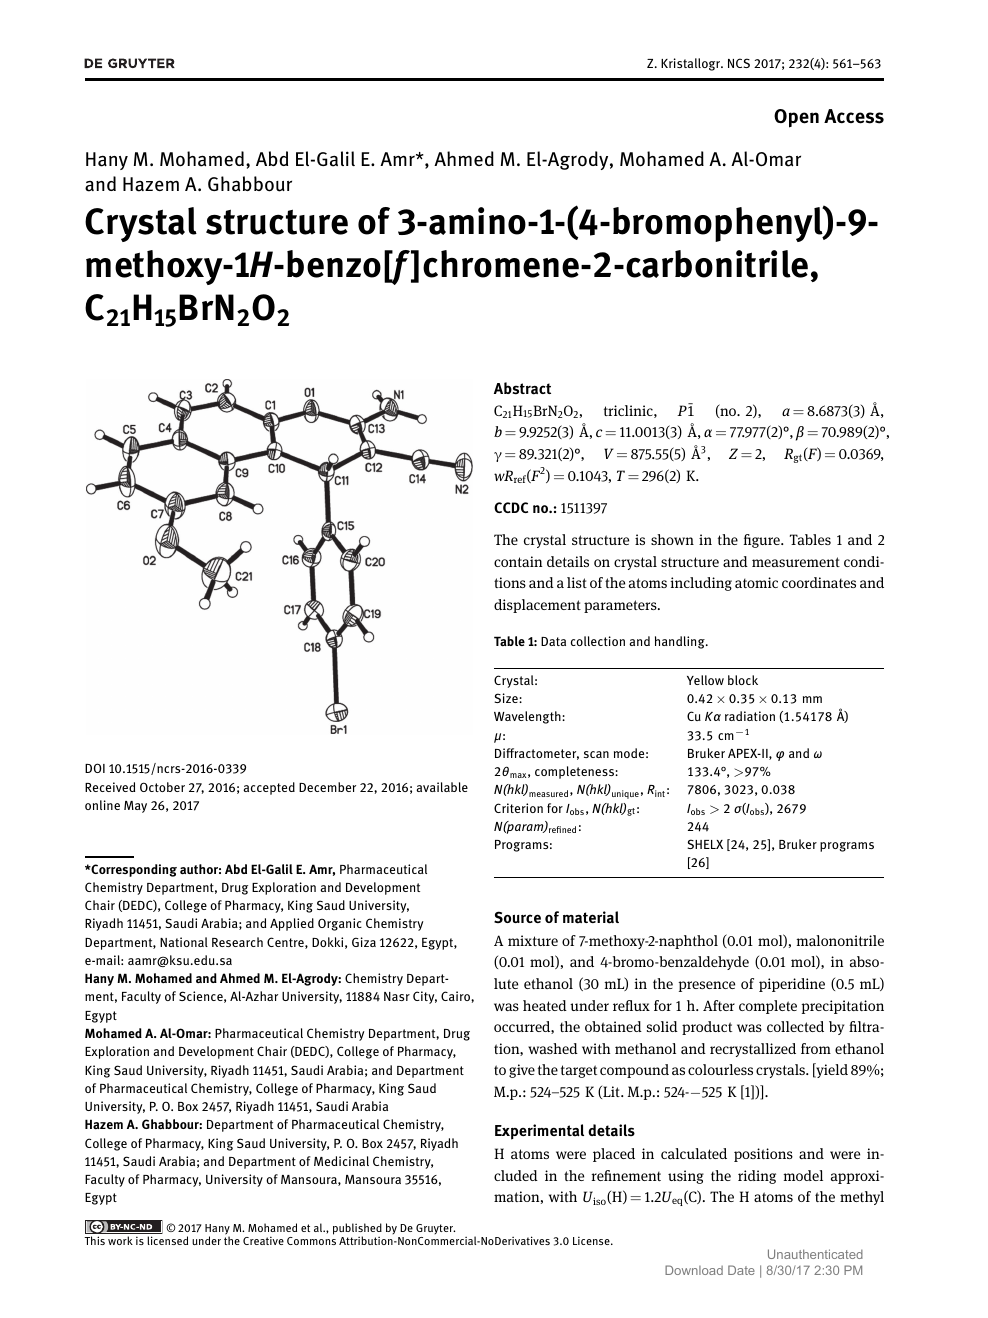 Crystal Structure Of 3 Amino 1 4 Bromophenyl 9 Methoxy 1h Benzo F Chromene 2 Carbonitrile C21h15brn2o2 Topic Of Research Paper In Chemical Sciences Download Scholarly Article Pdf And Read For Free On Cyberleninka Open Science Hub